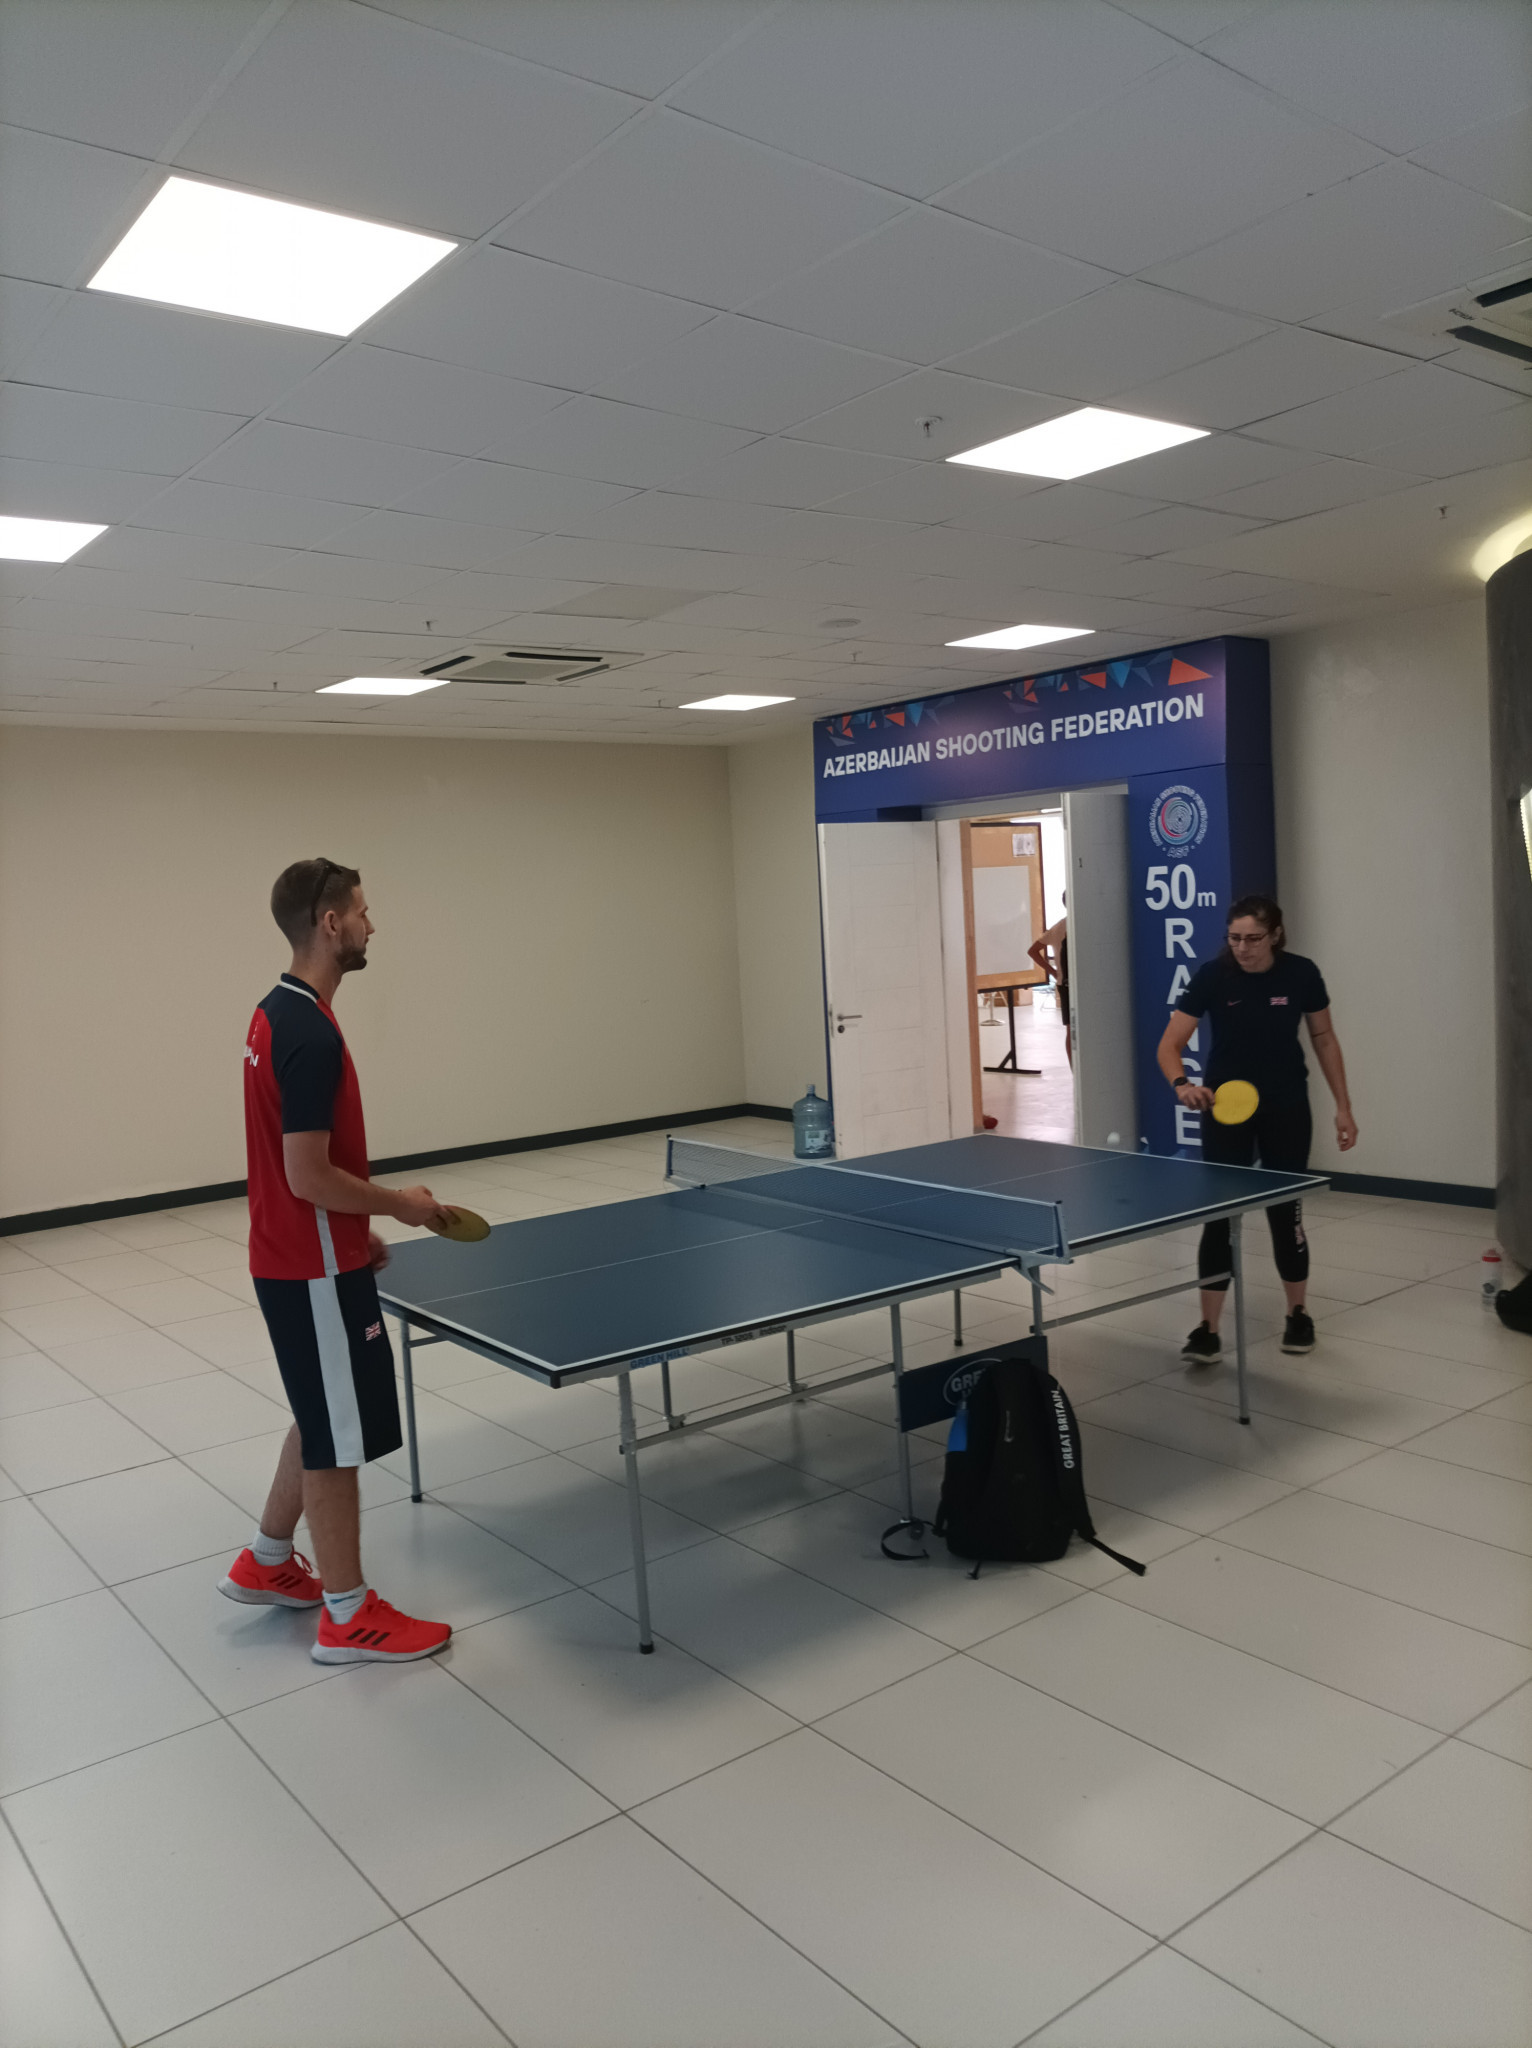 Competitors from Britain relax with a game of table tennis ©ITG